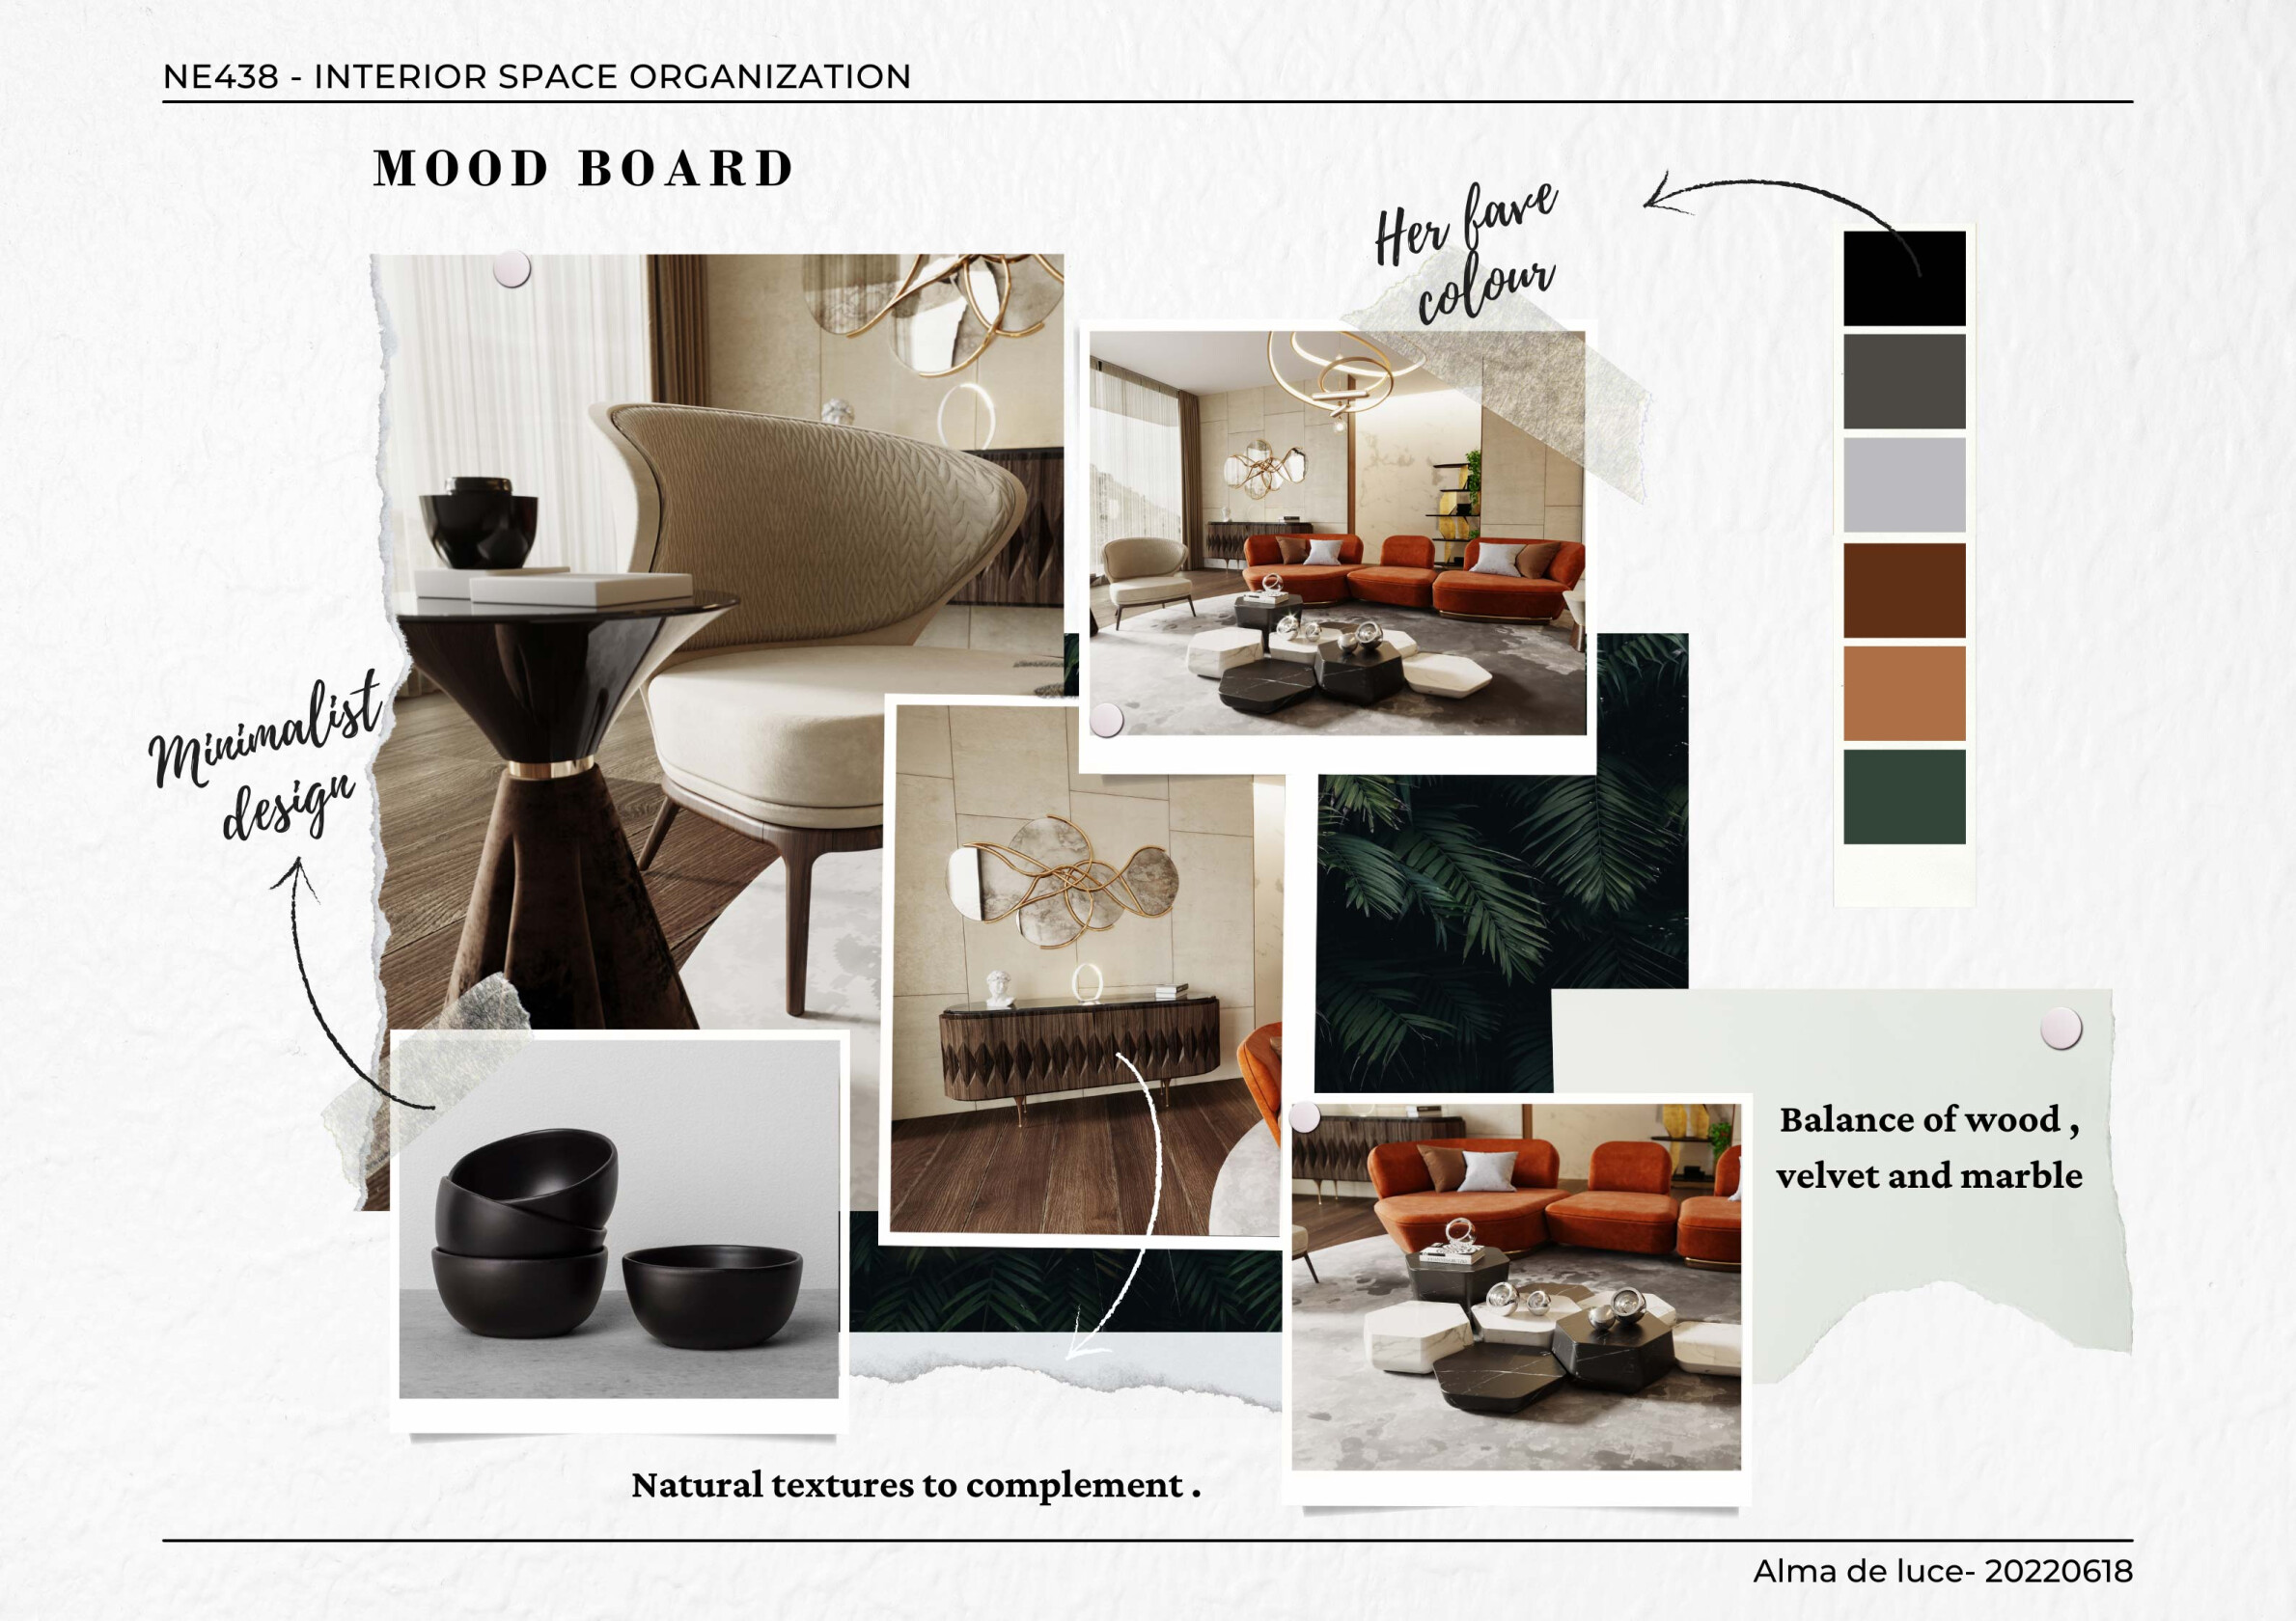 how-to-make-a-mood-board-6-tools-to-visualize-your-ideas-alma-de-luce